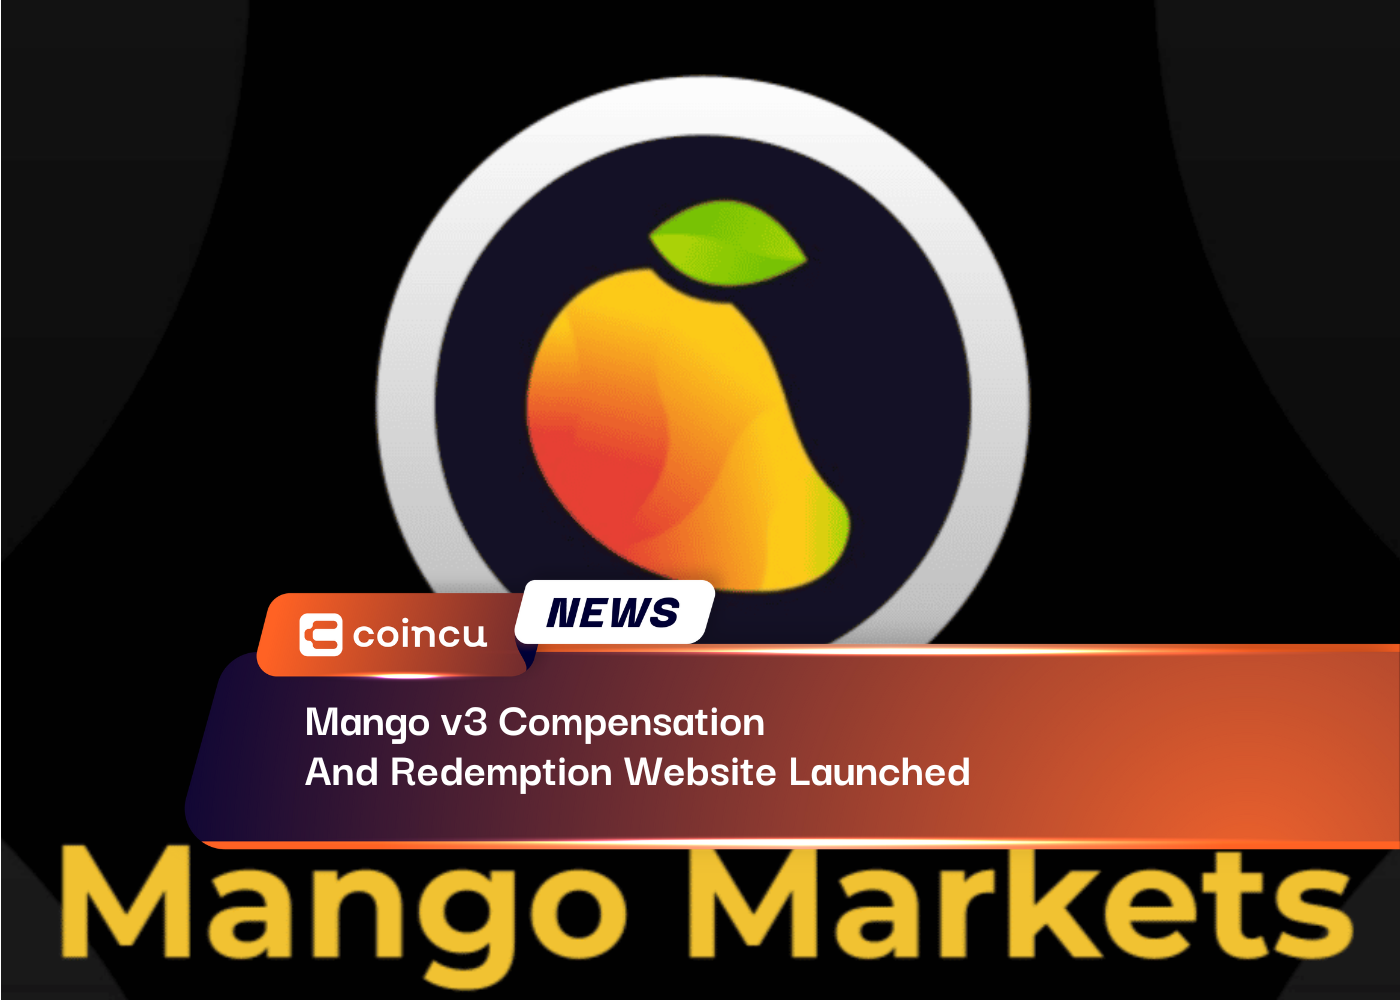 Mango v3 Compensation And Redemption Website Launched